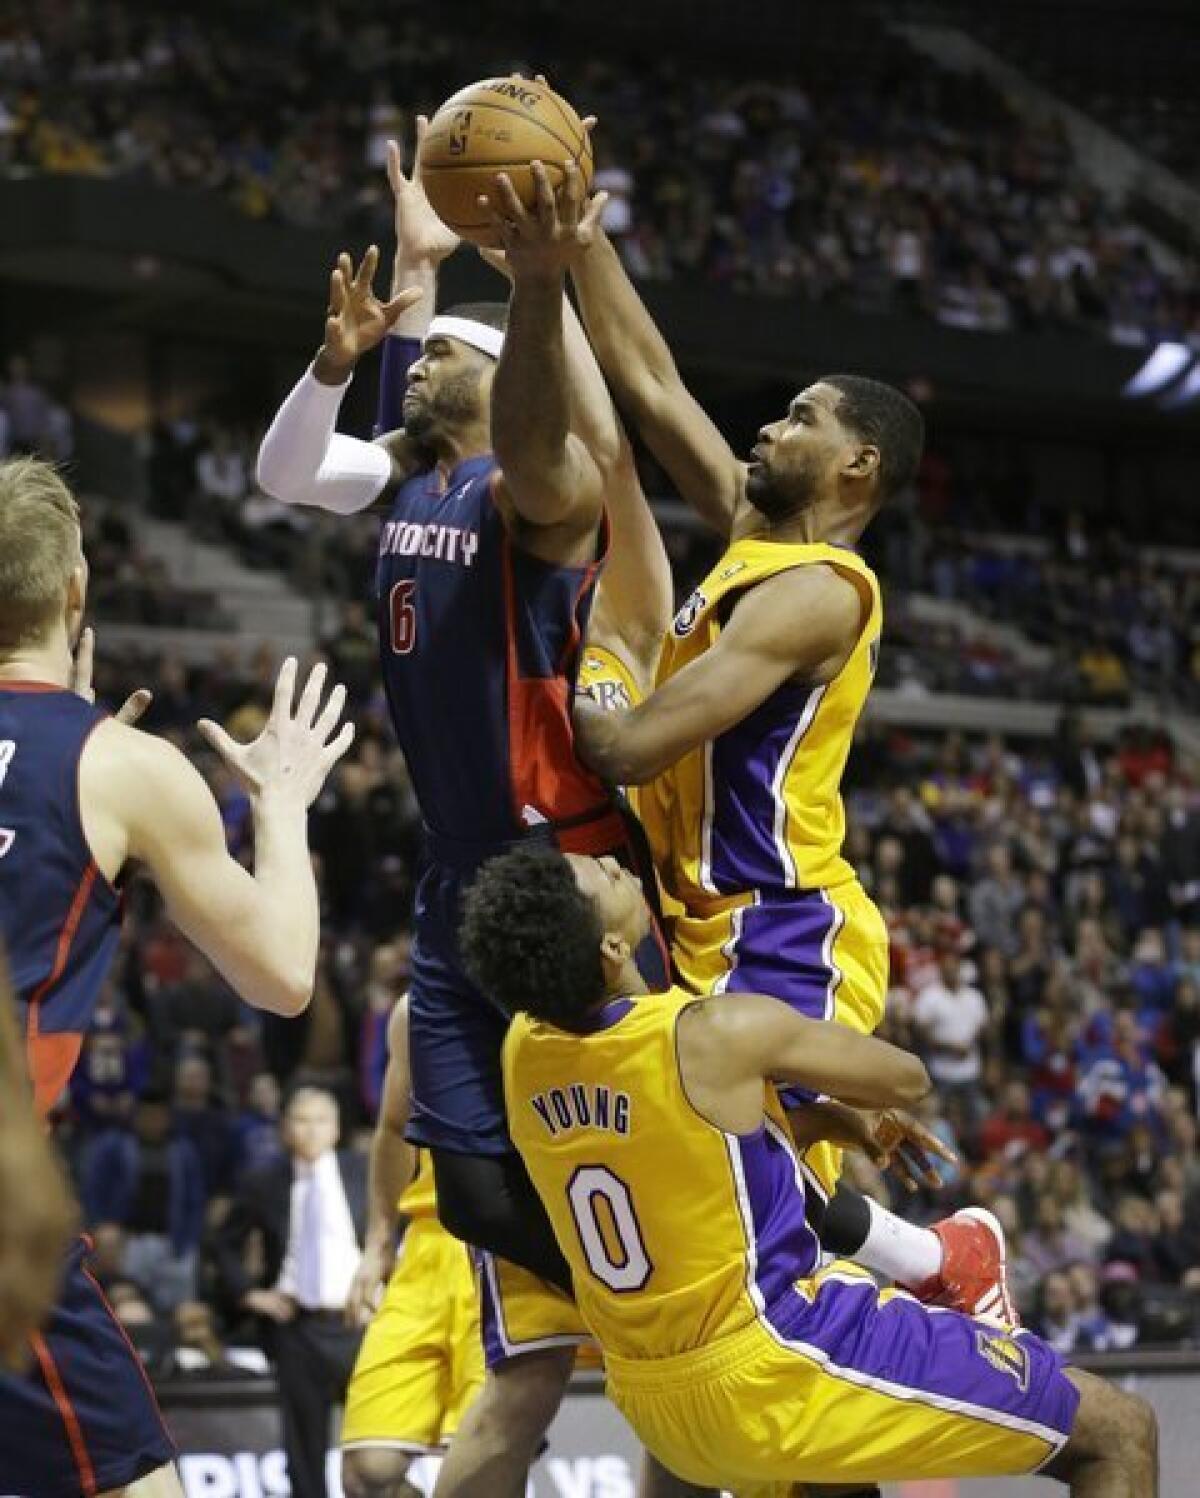 The Lakers' Nick Young takes a charge from Josh Smith in the closing seconds of a game against the Detroit Pistons.